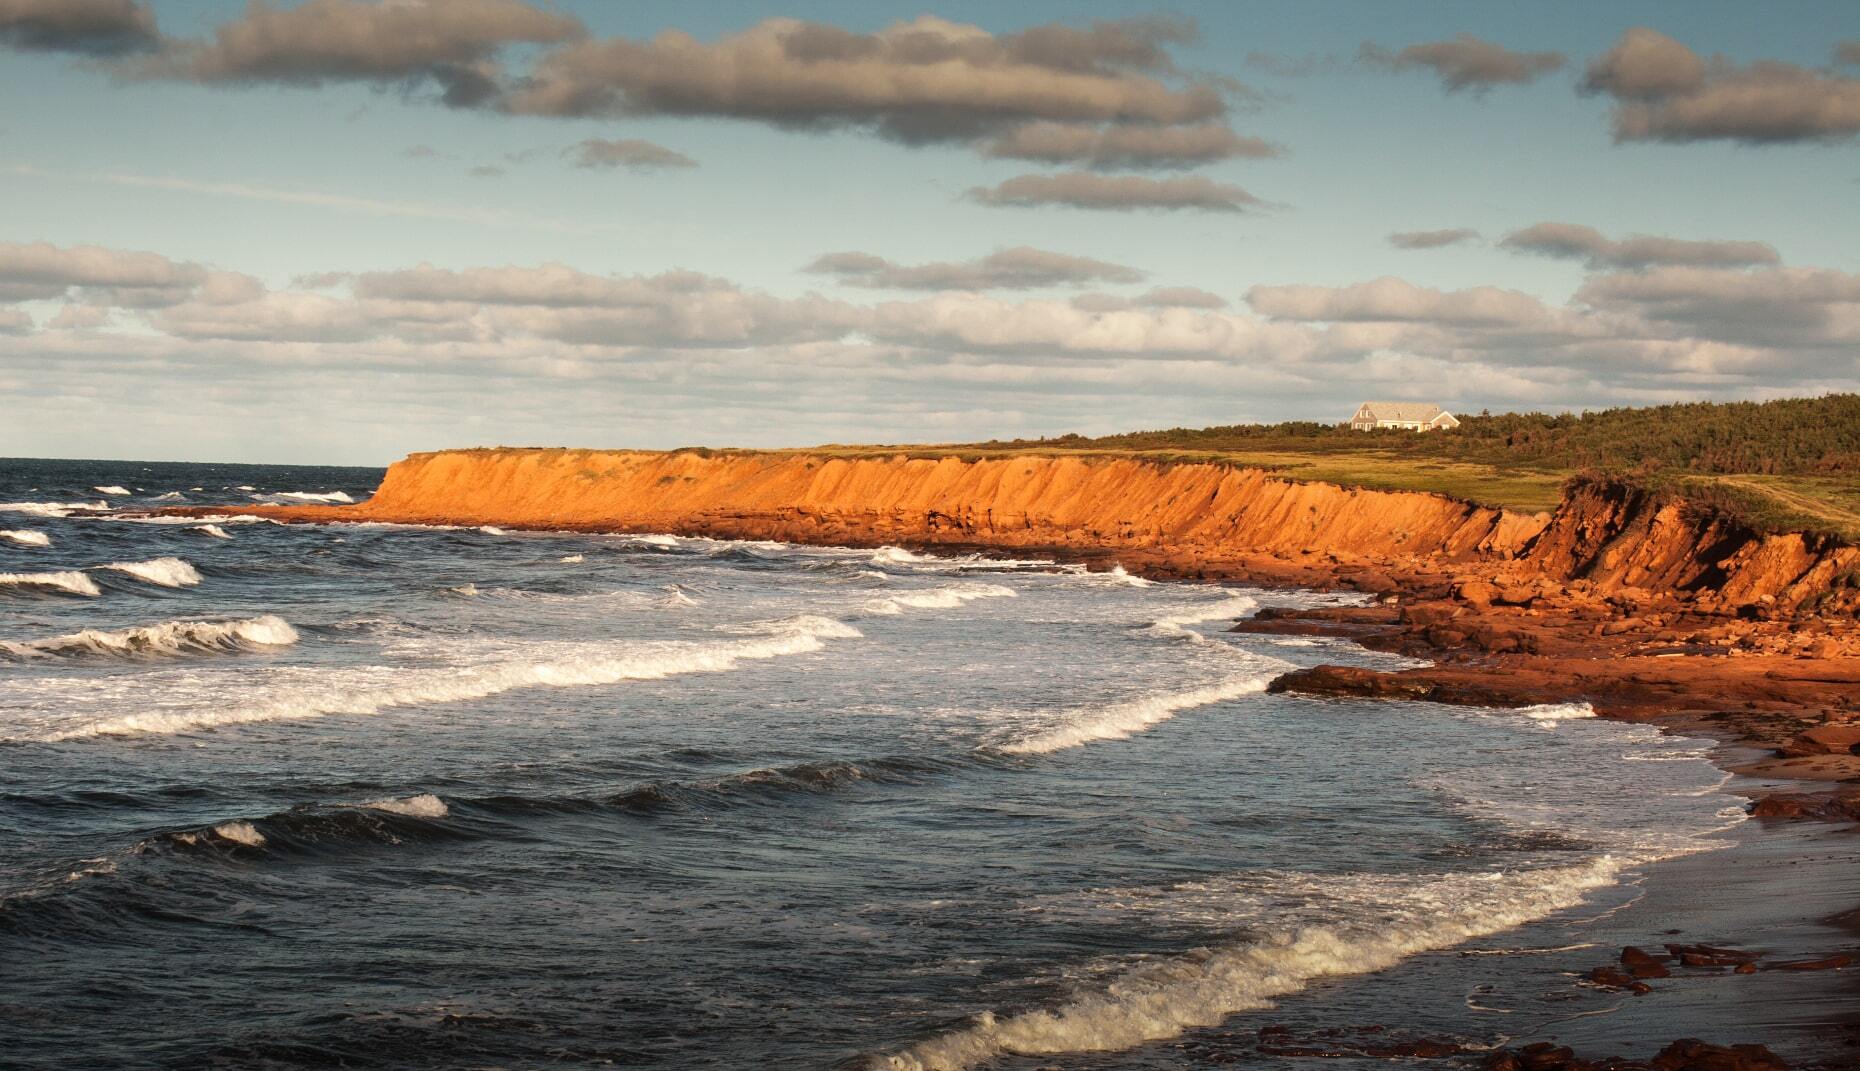 <p>Island life is brilliantly captured in this juxtaposition of farmland, red-sand beaches, and ocean. From Anne of Green Gables’ house and <a href="https://www.tourismpei.com/pei-beaches" rel="noreferrer noopener">1,100 km of shoreline</a> to fresh lobster and locally grown potatoes, visitors never lack for things to do, see, and eat on PEI.</p>